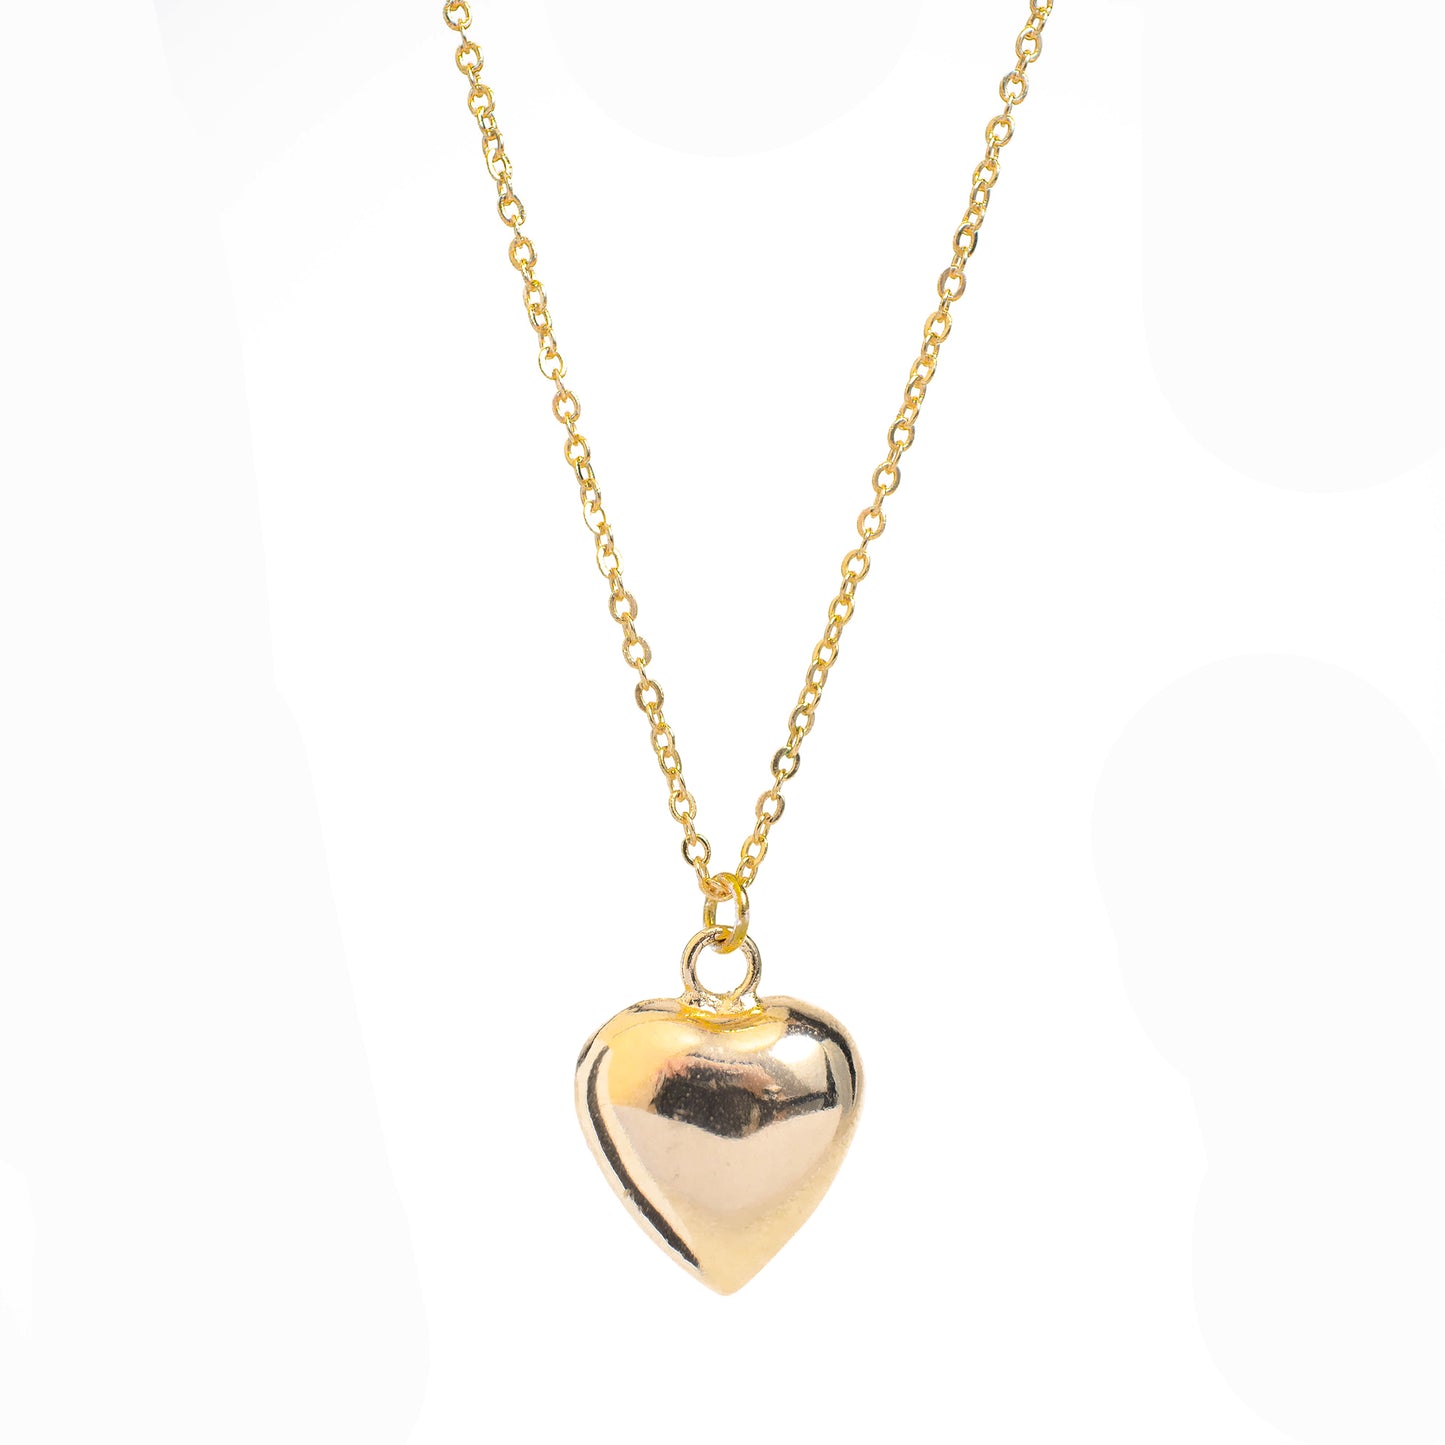 This photo features a thin chain necklace made of 14K gold-plated sterling silver, paired with a hollow heart-shaped charm.